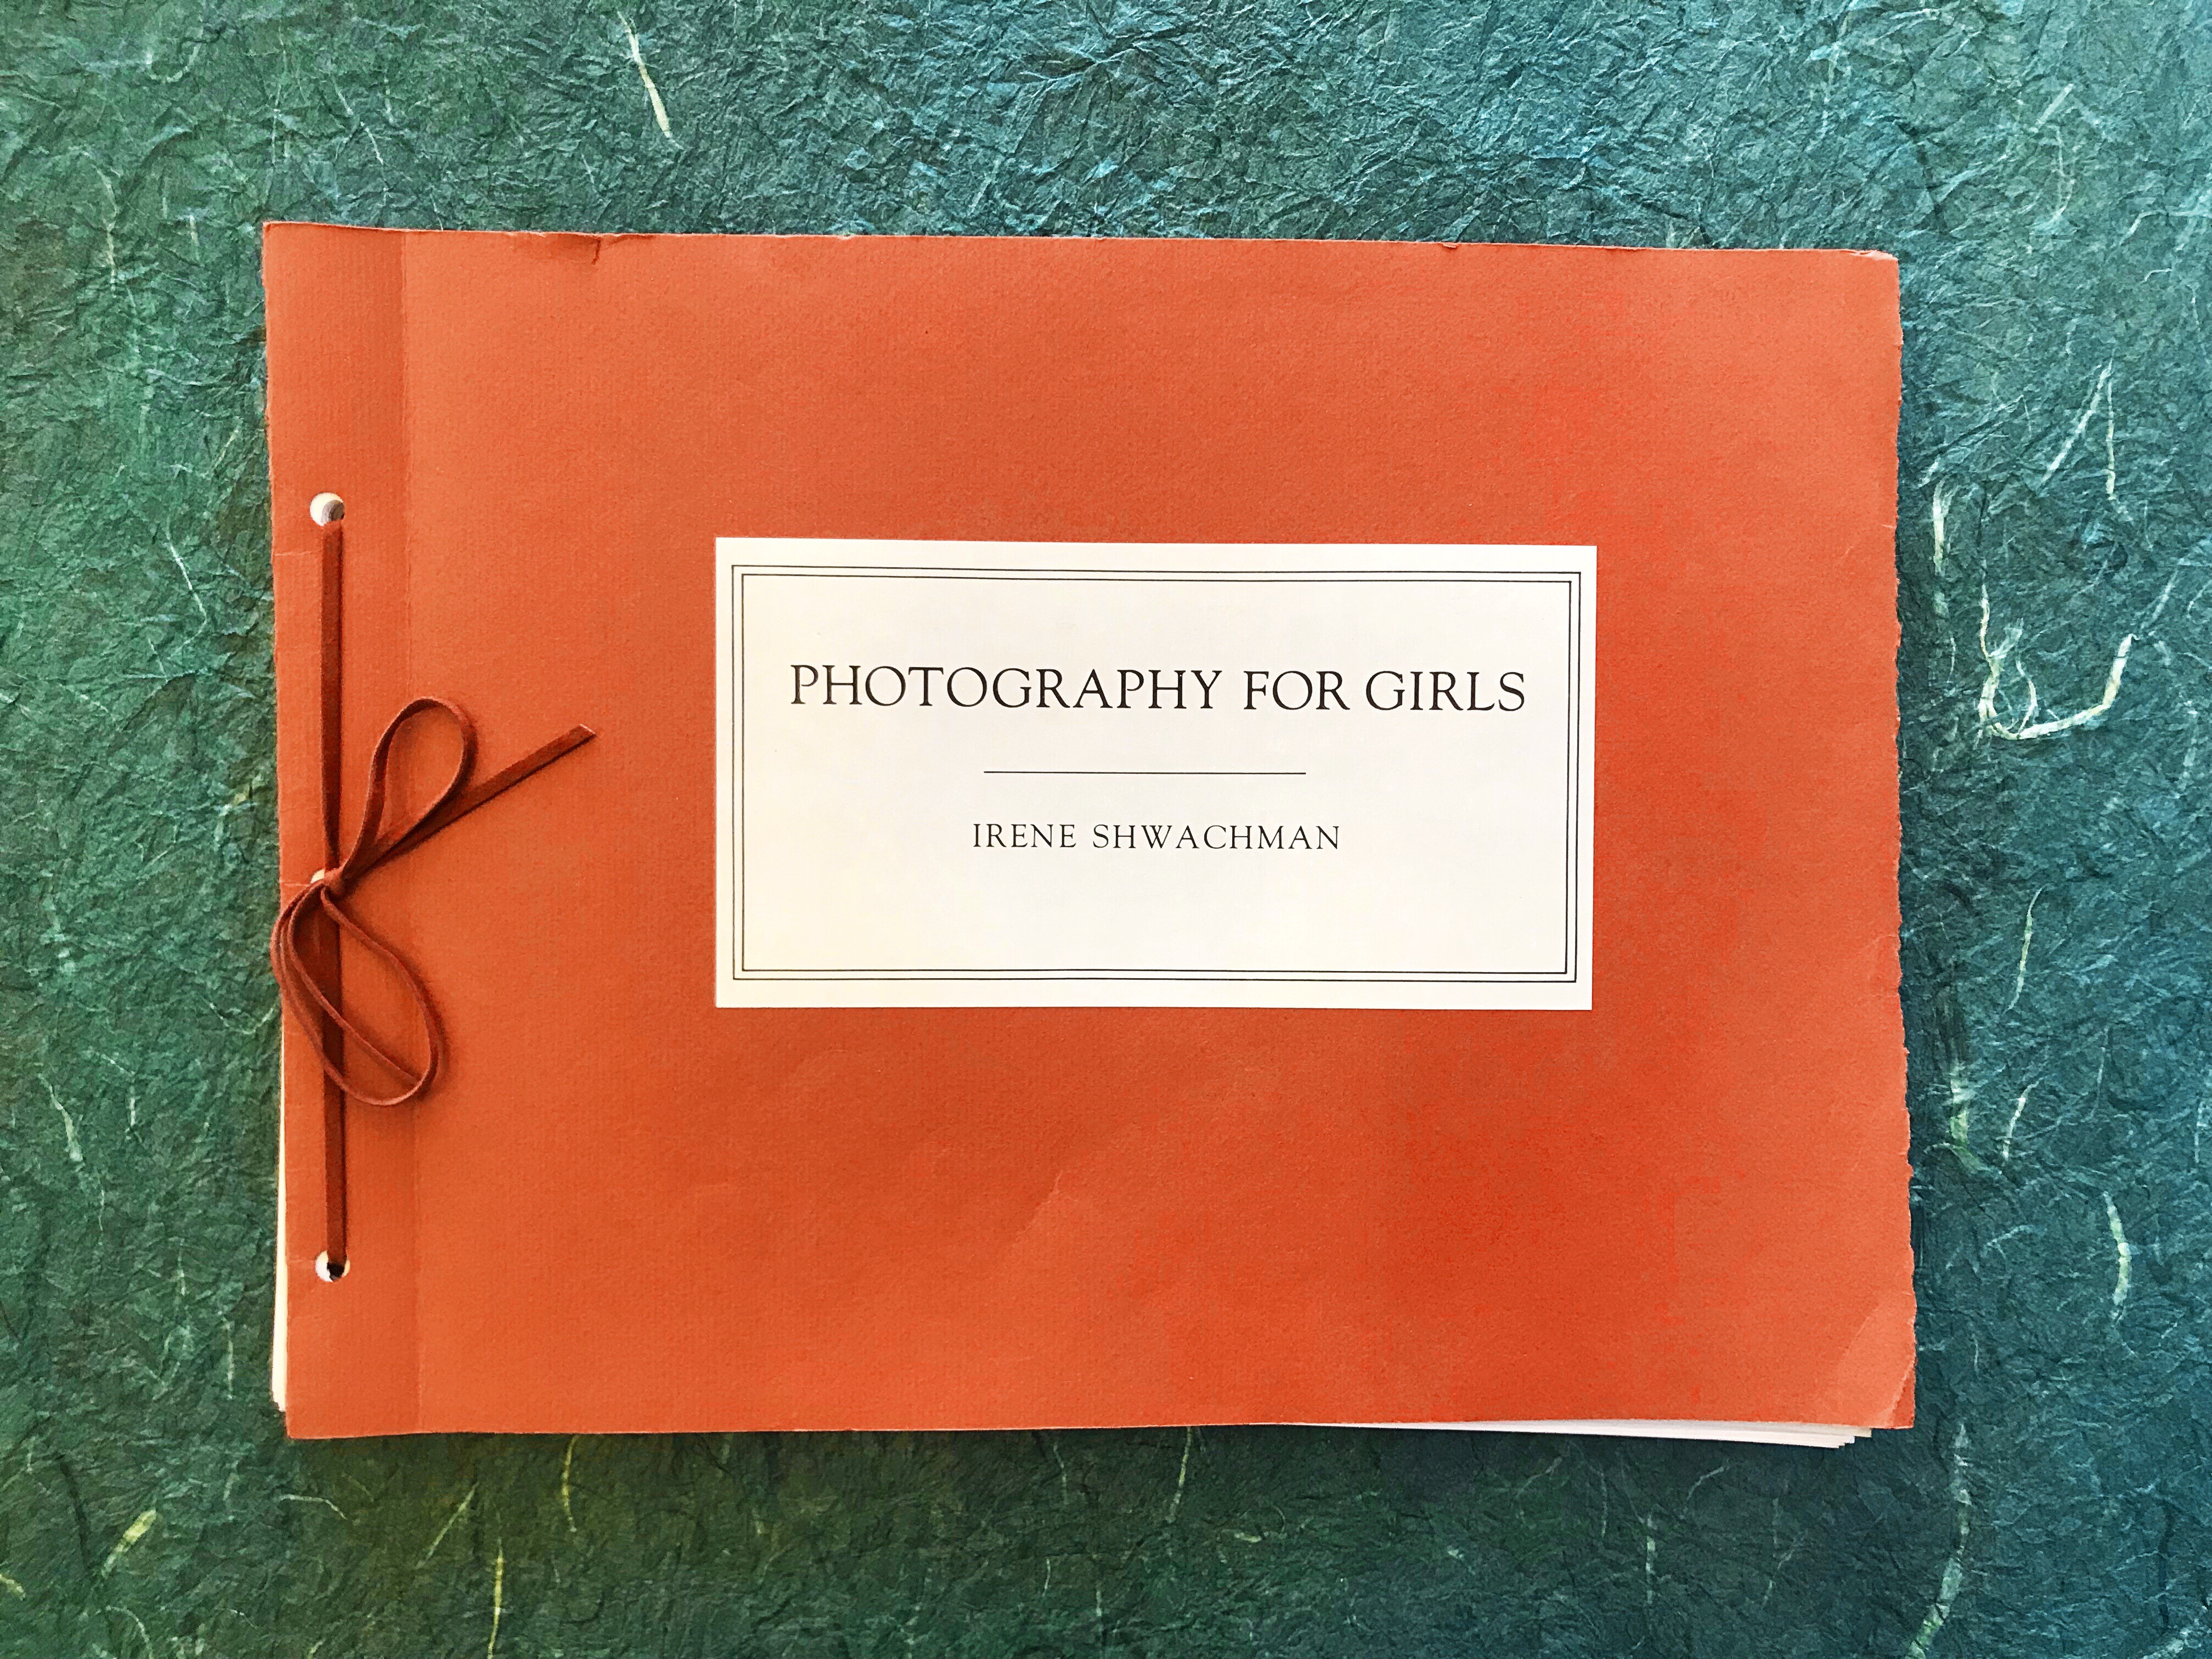 Photography for Girls by Irene Shwachman